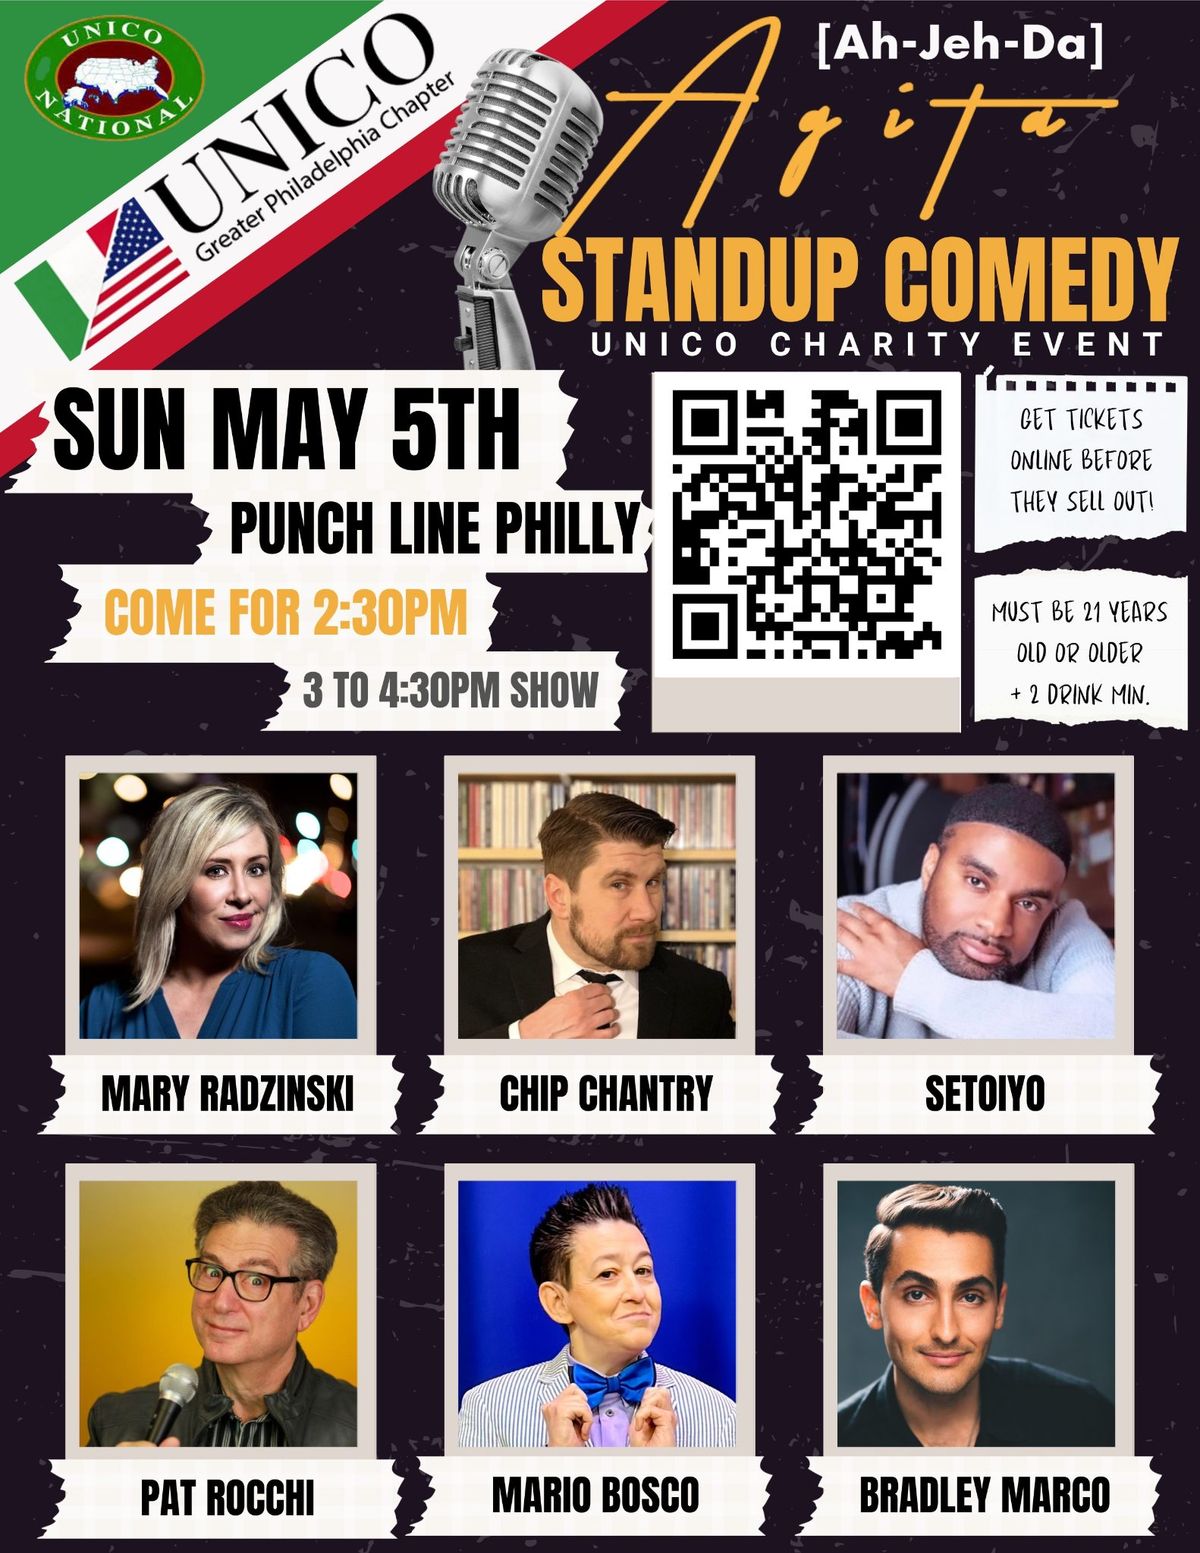 STAND UP COMEDY EVENT